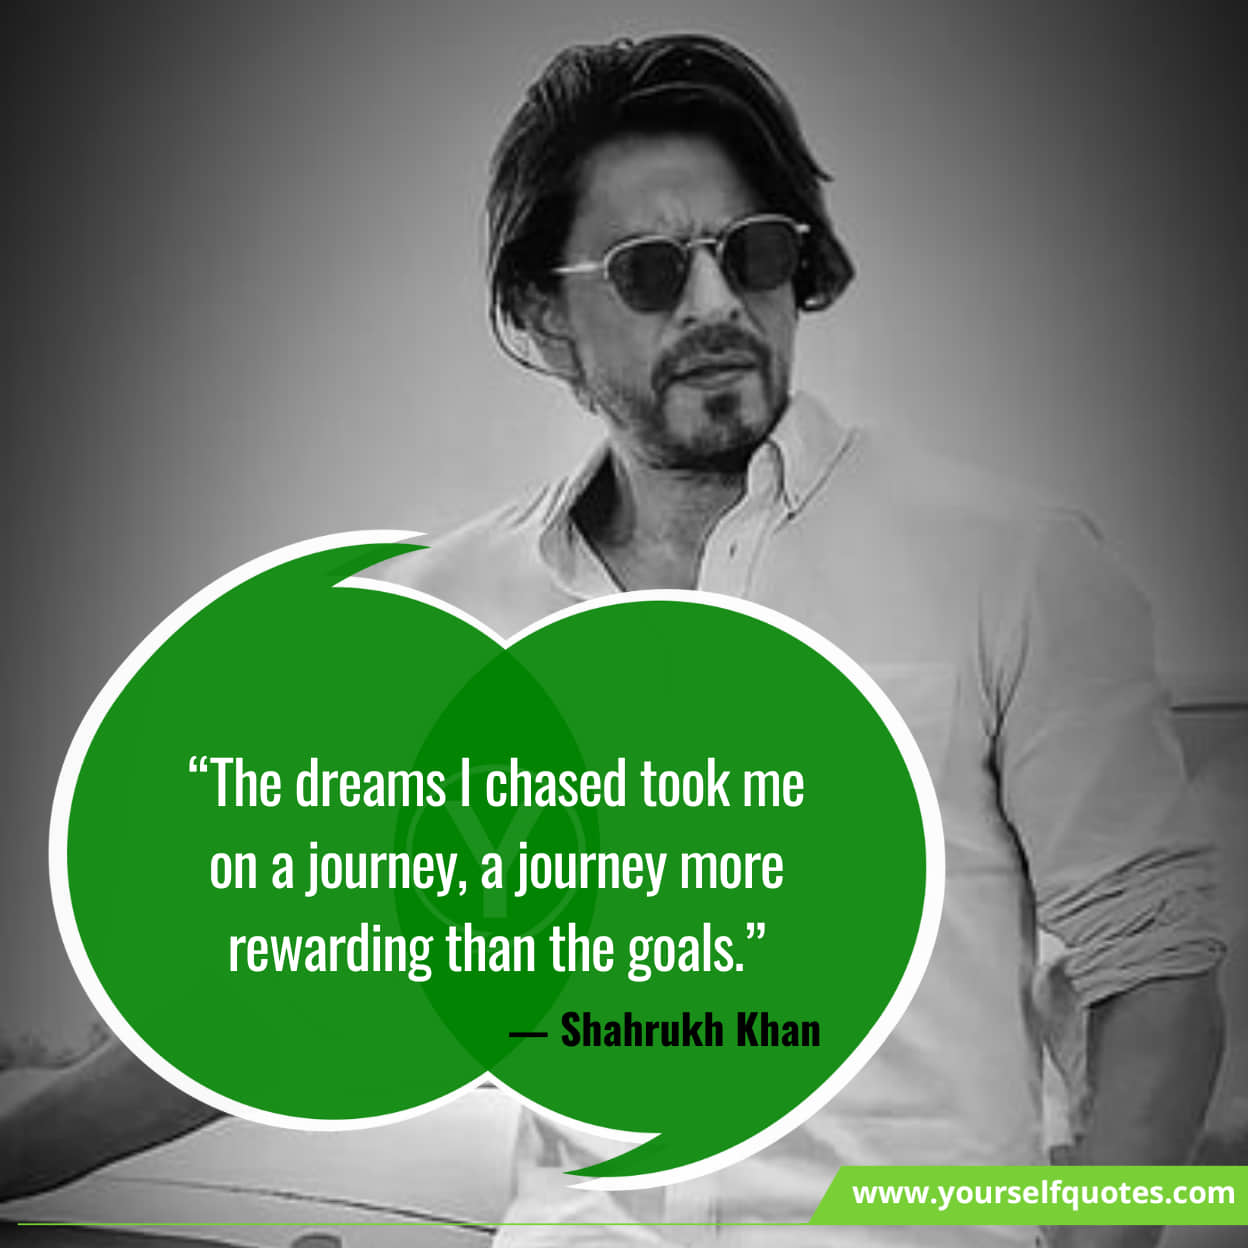 Shahrukh Khan quotes on success and fame